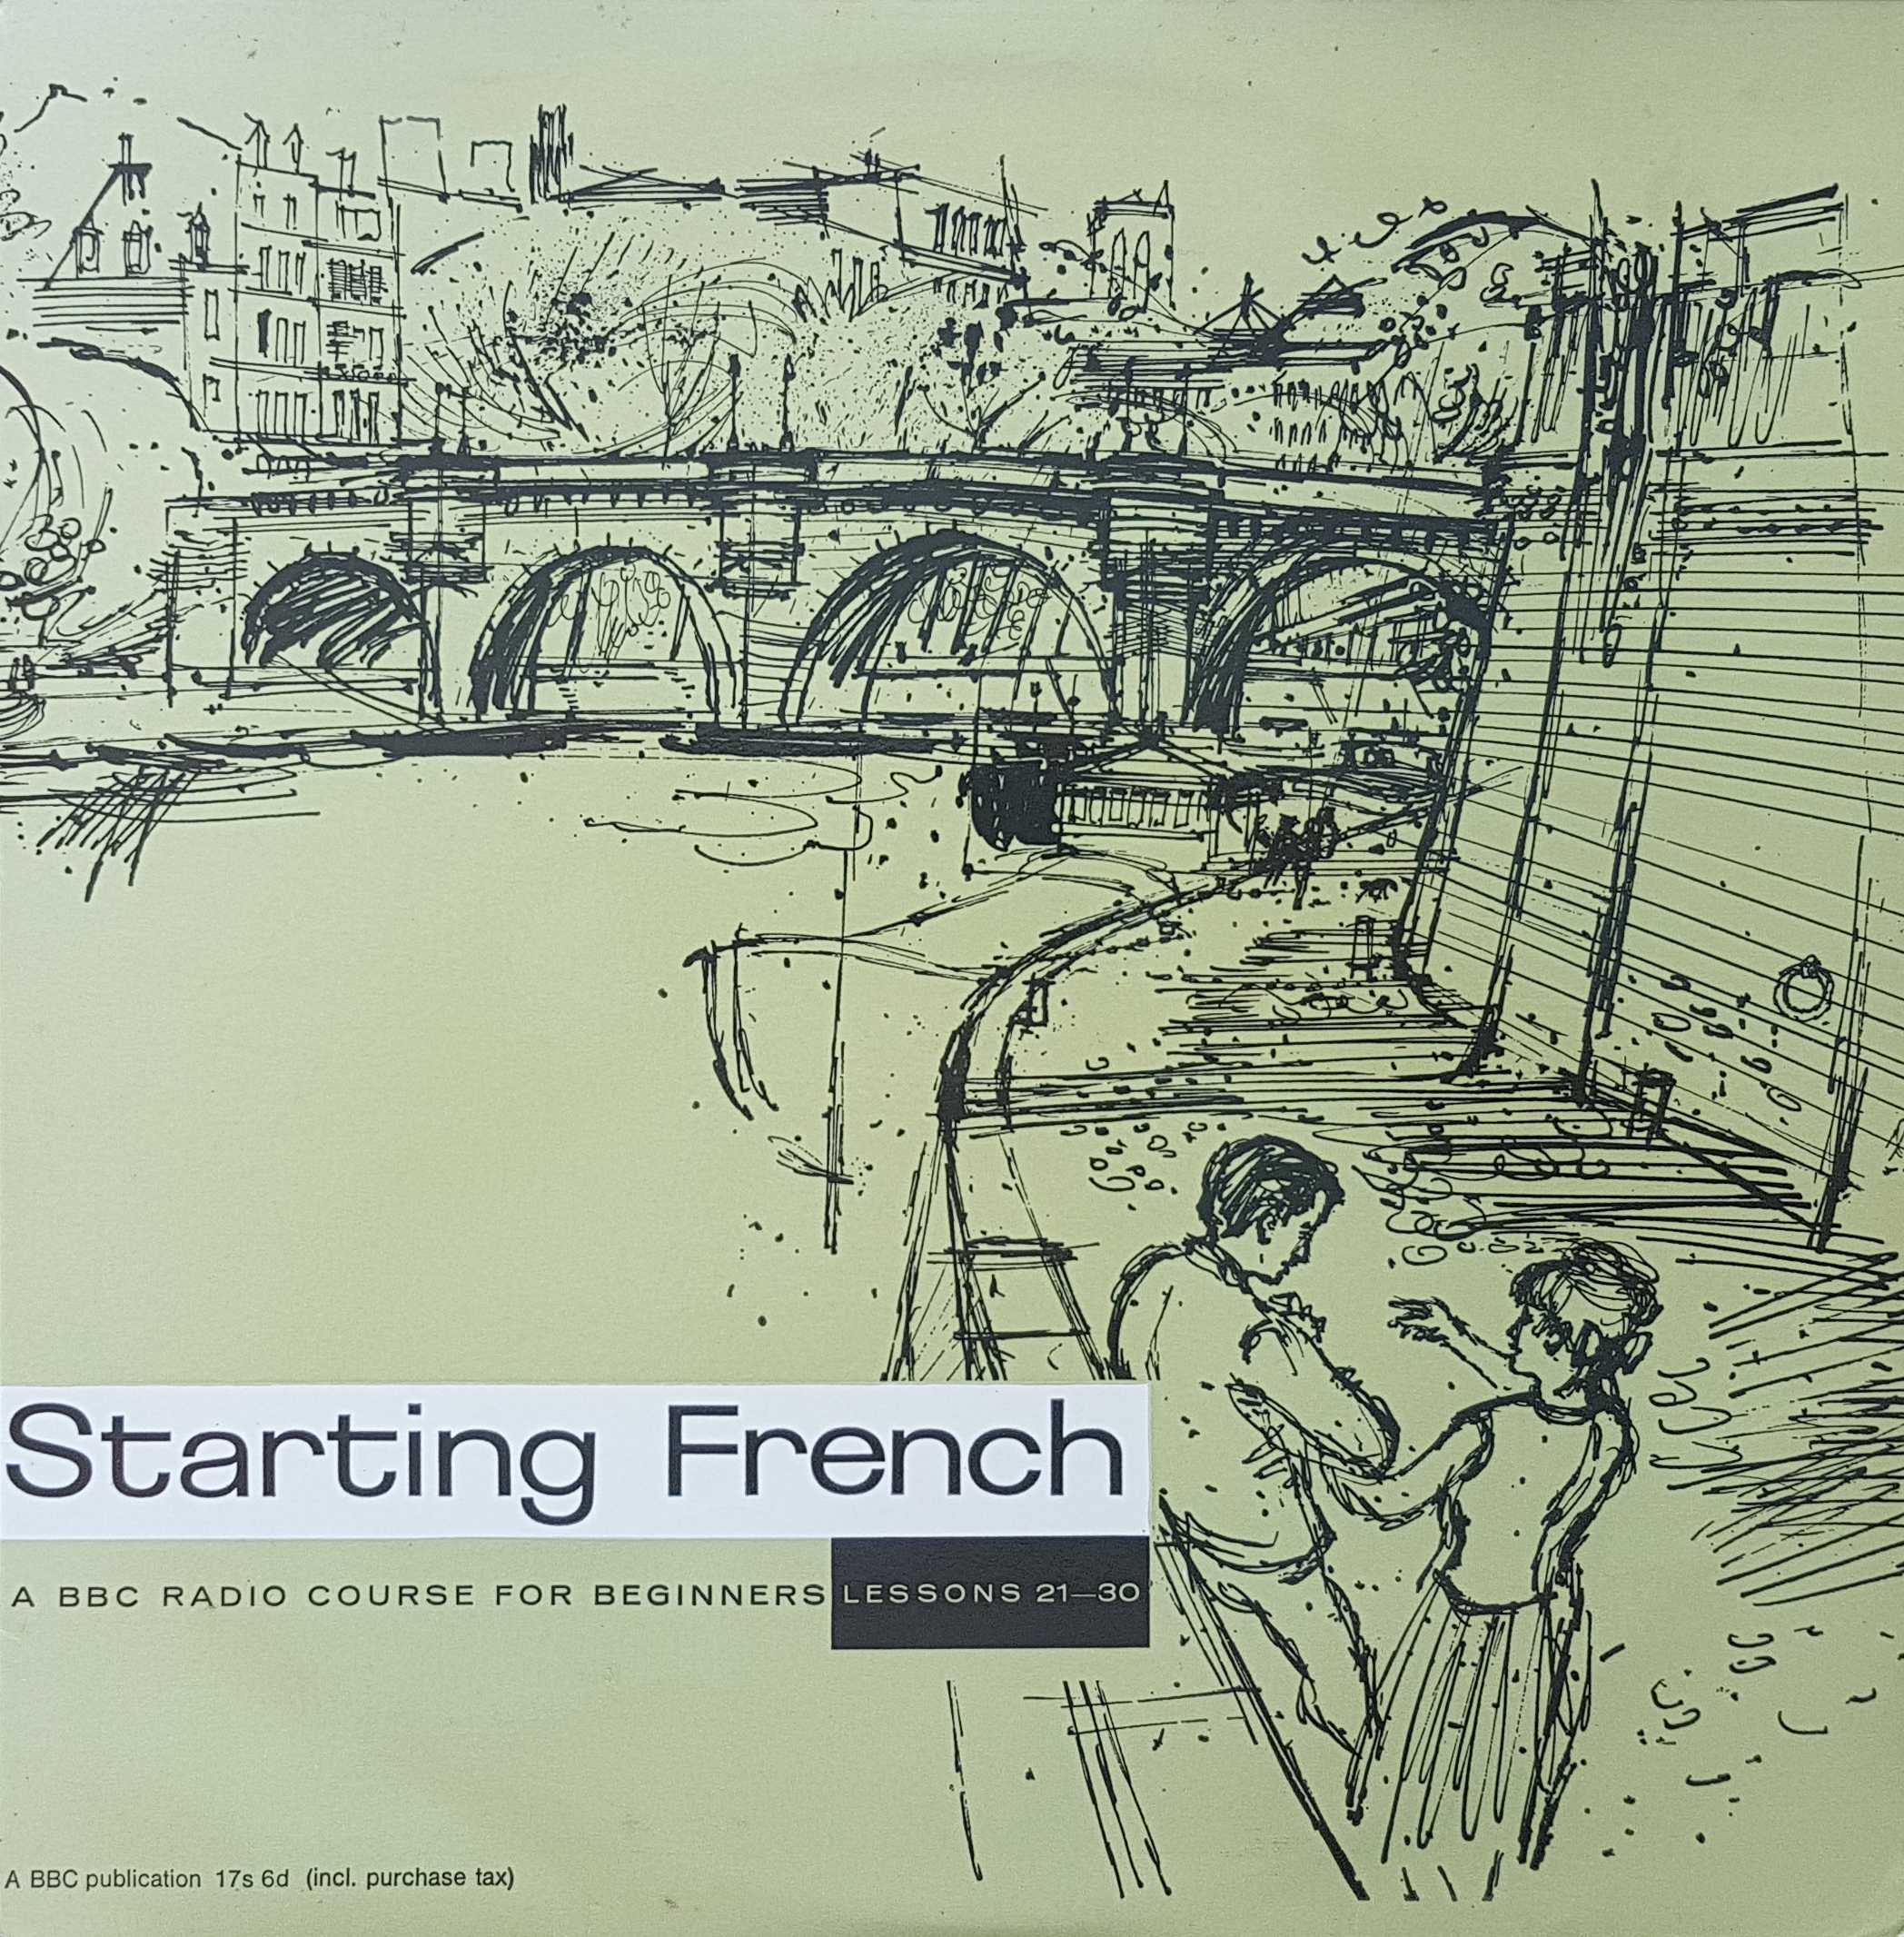 Picture of OP 21/22 Starting French - Parts 21 - 30 by artist Elsie Ferguson from the BBC albums - Records and Tapes library